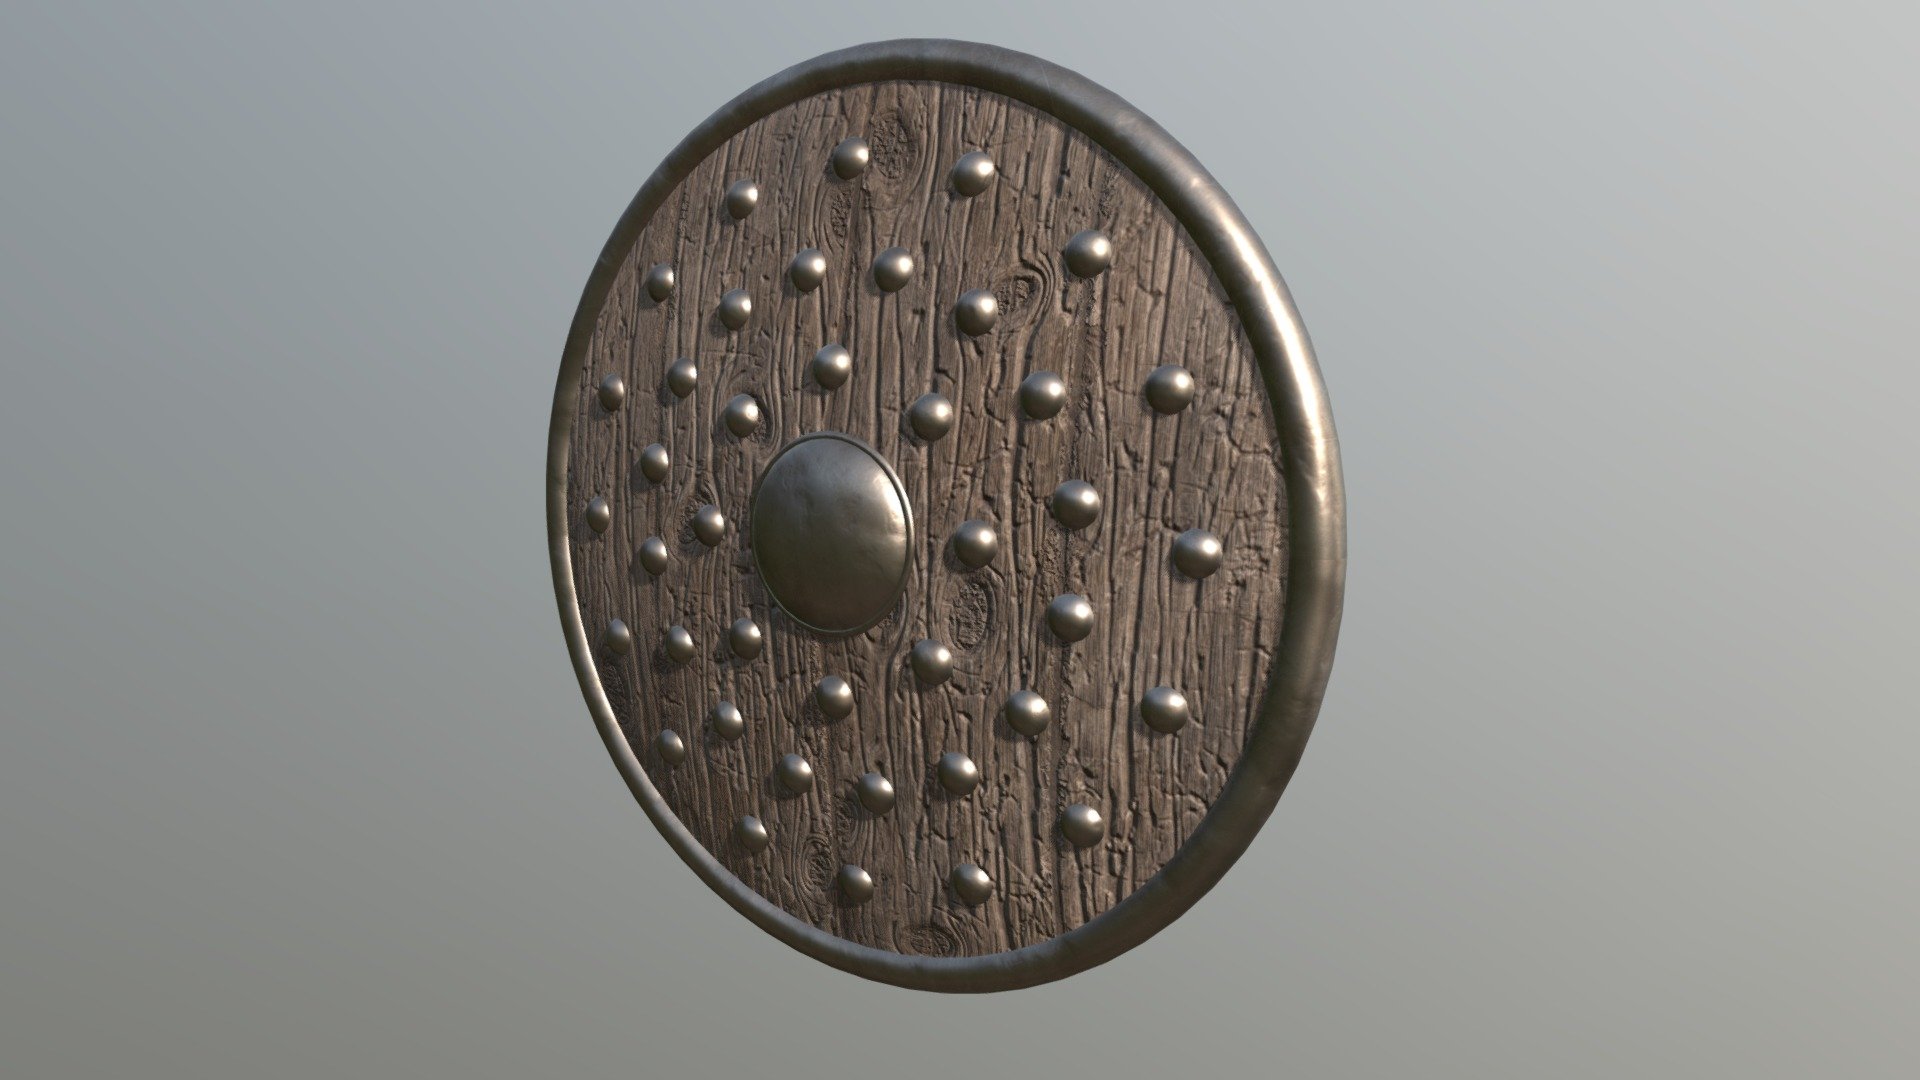 Hi all,

Here is wooden shield asset. It comes in following formats:

.blend

.fbx

.obj

The blender file has the shaders set up, so it's ready to render using Cycles.

It also comes with set of 4K png maps 3d model